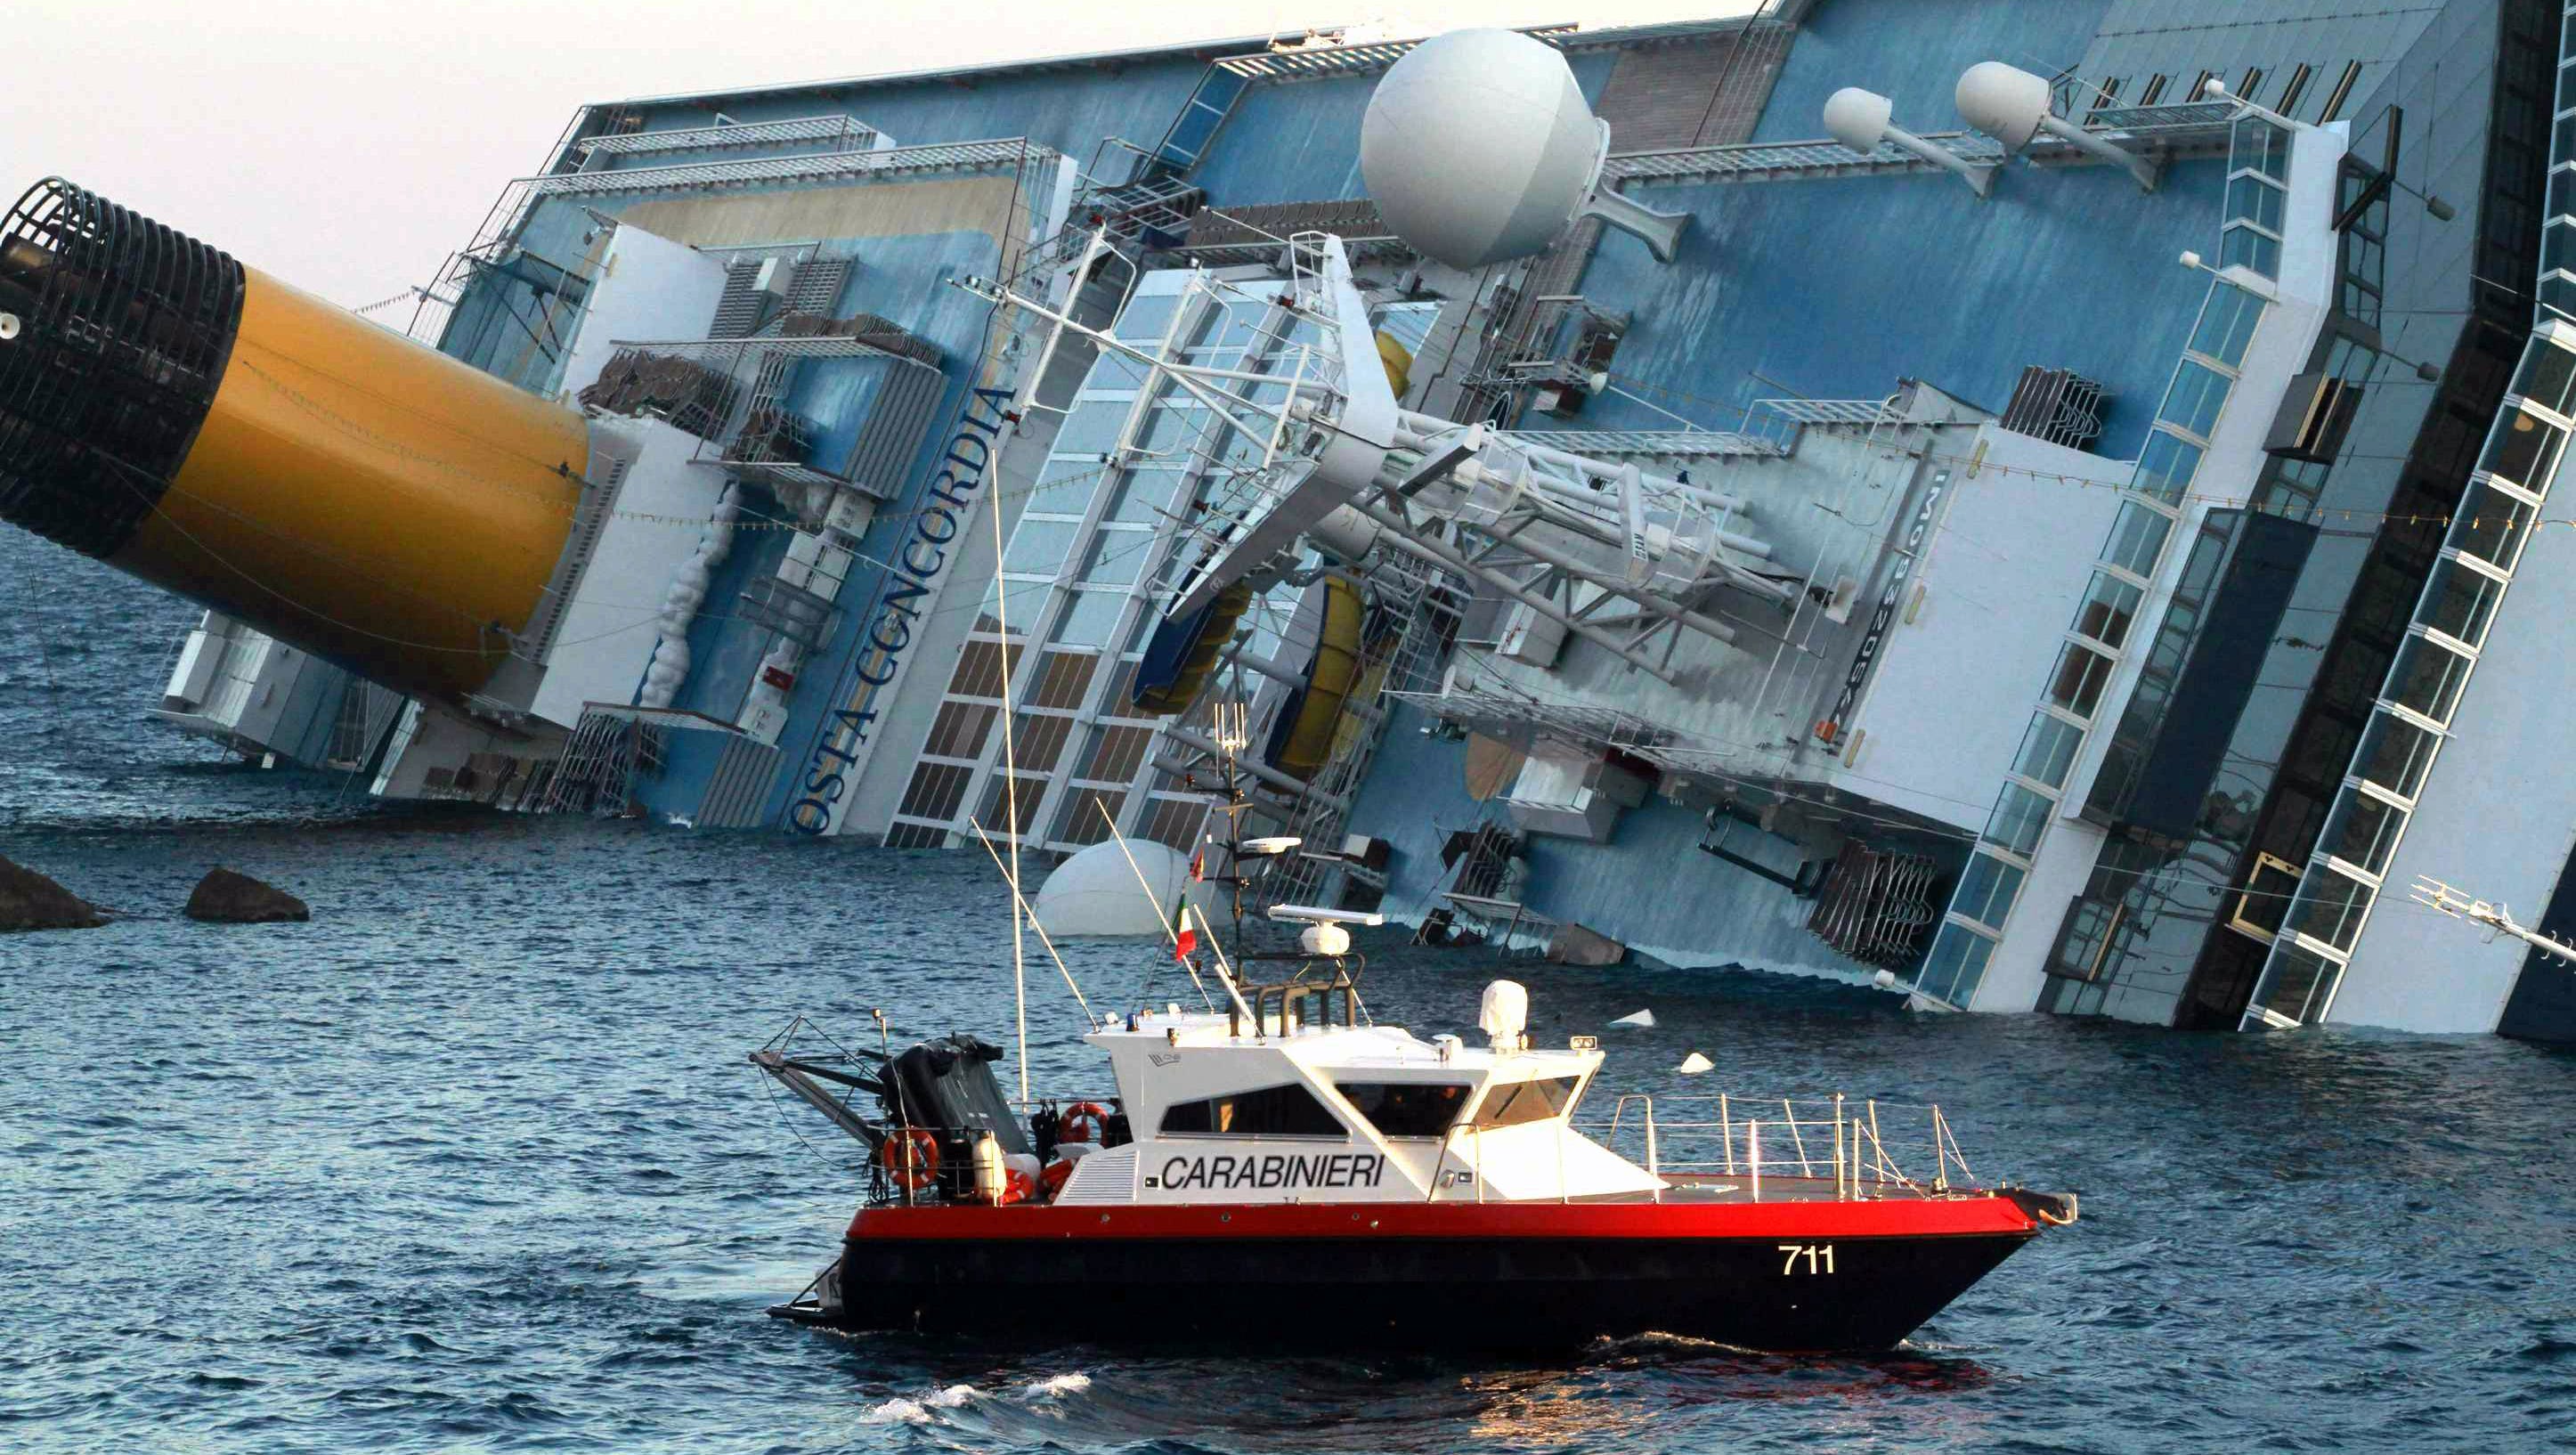 recent cruise ship accidents 2022